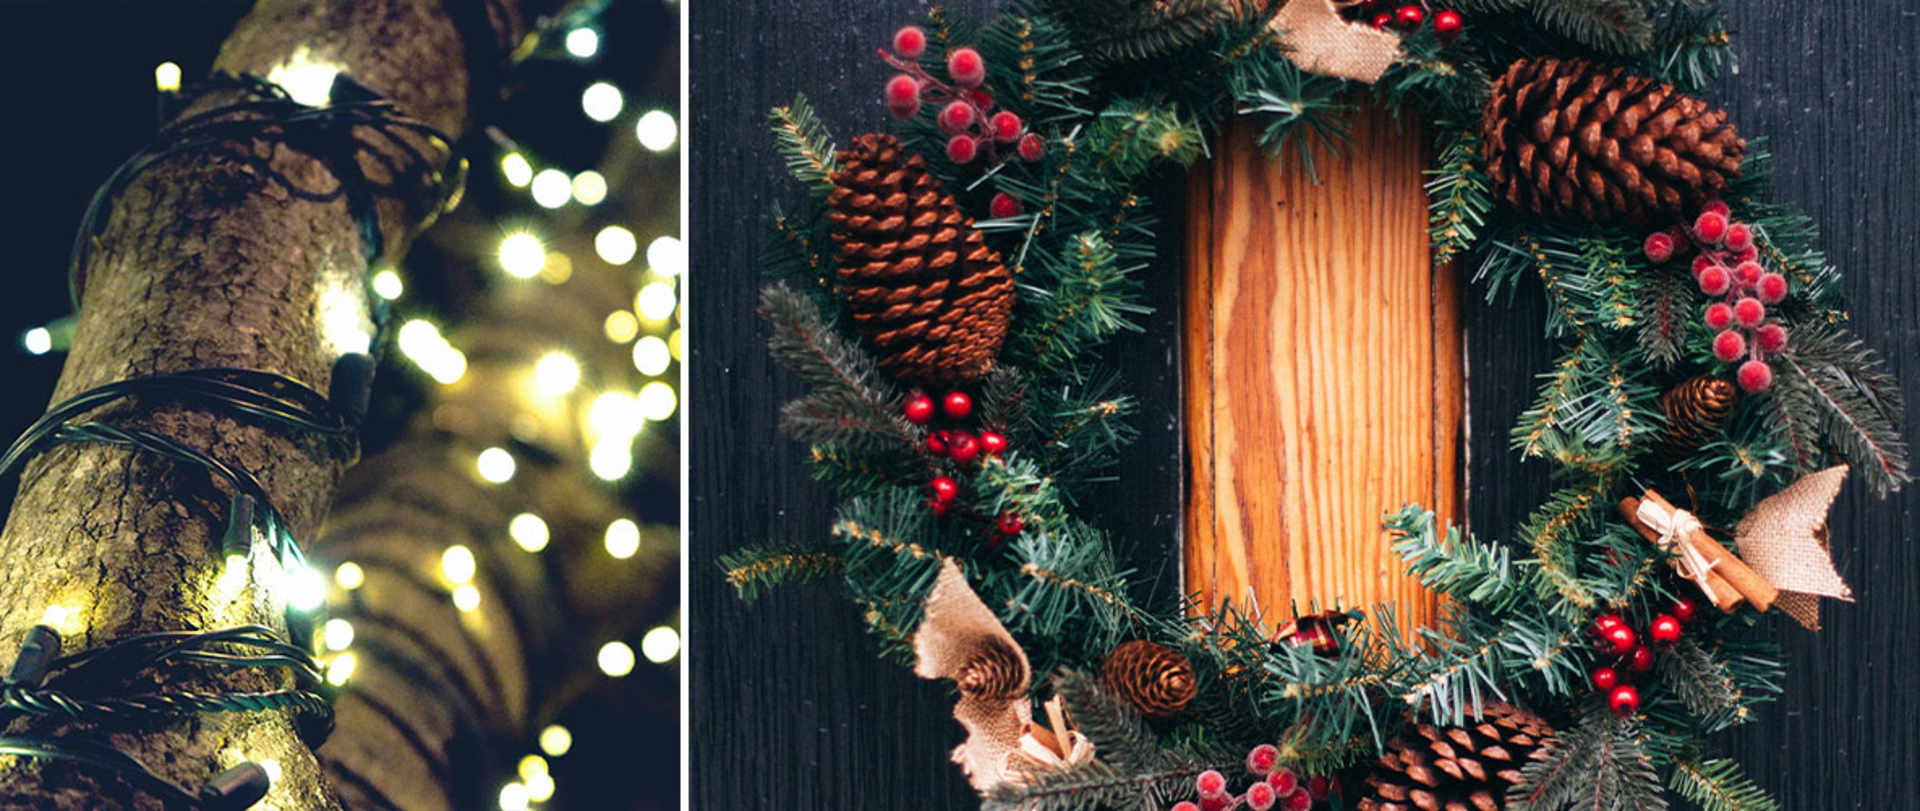 Getting your home ready for Christmas this year | Let them know